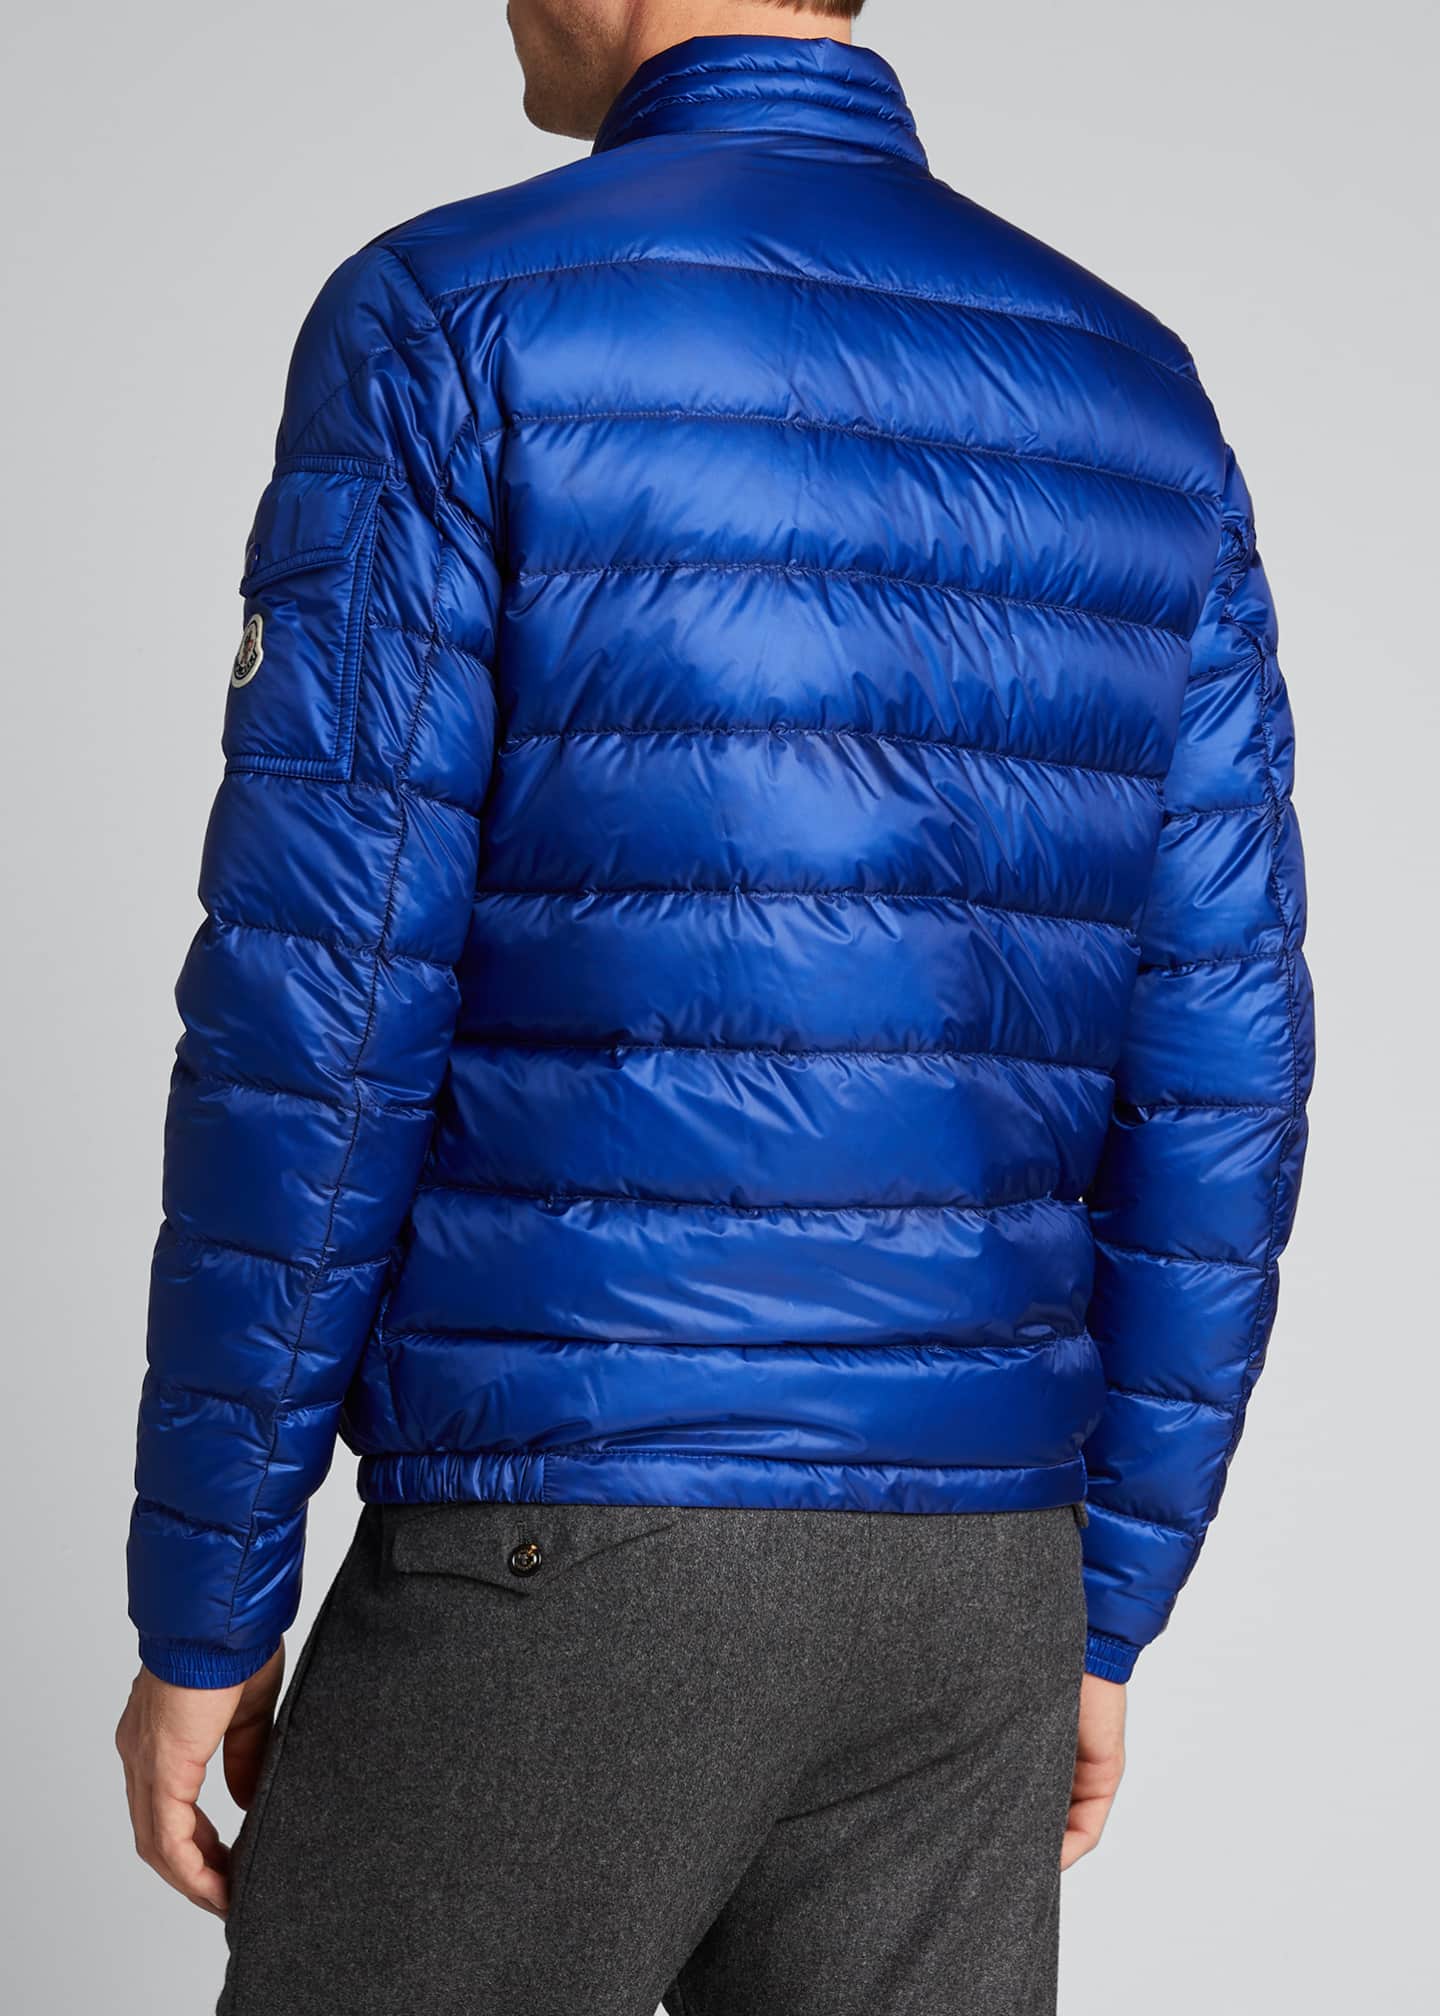 Moncler Men's Agay Down Quilted Jacket - Bergdorf Goodman